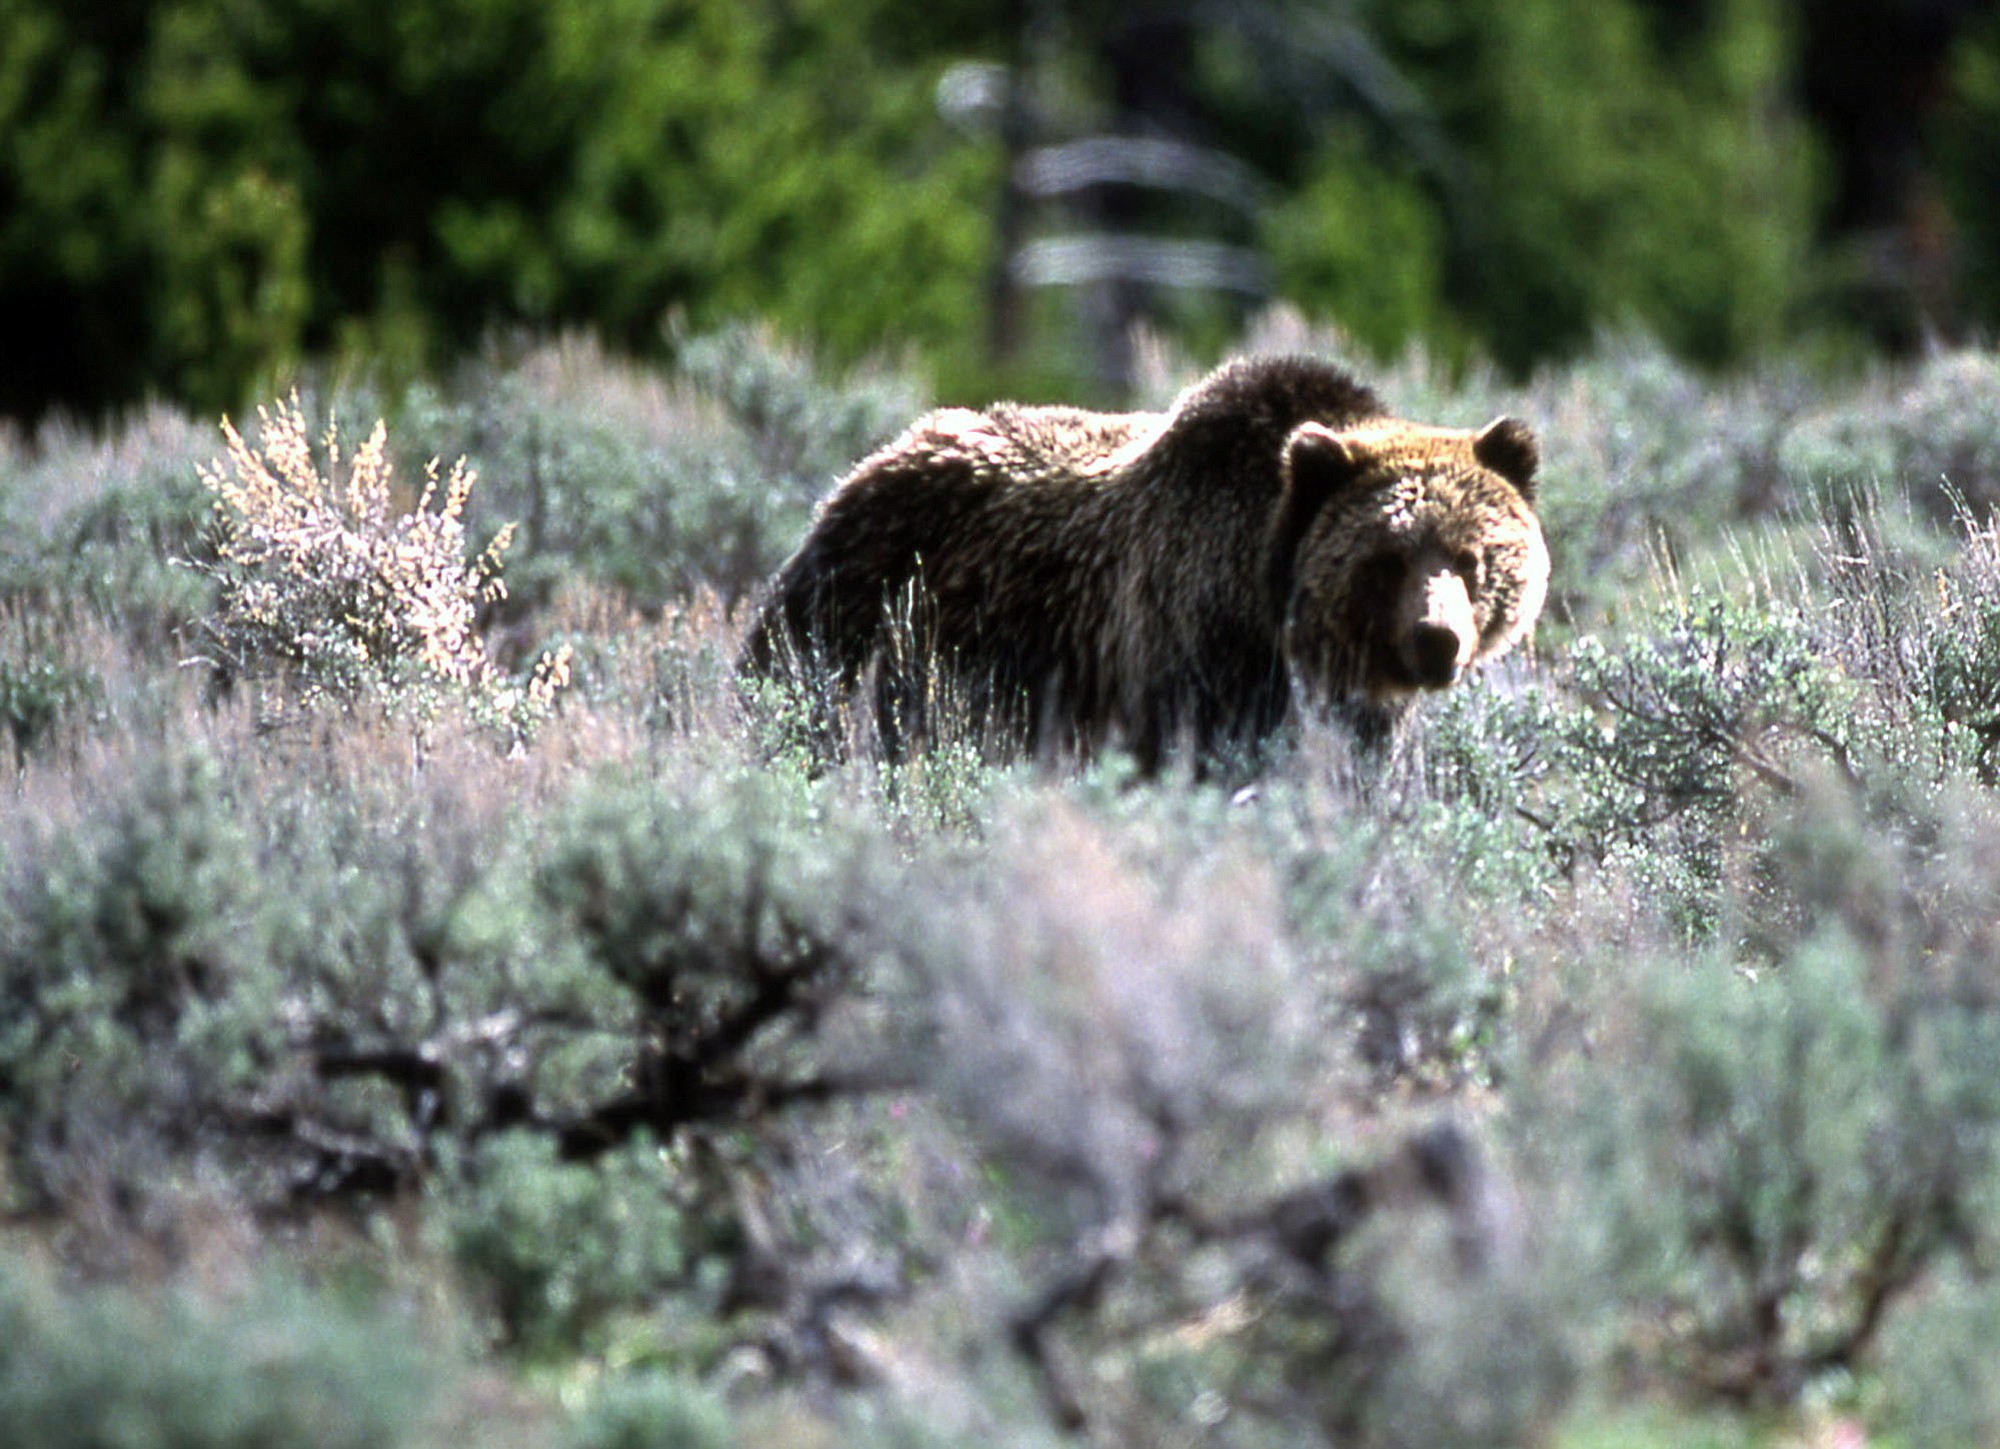 A grizzly bear passes through a meadow in Yellowstone National Park in Montana.